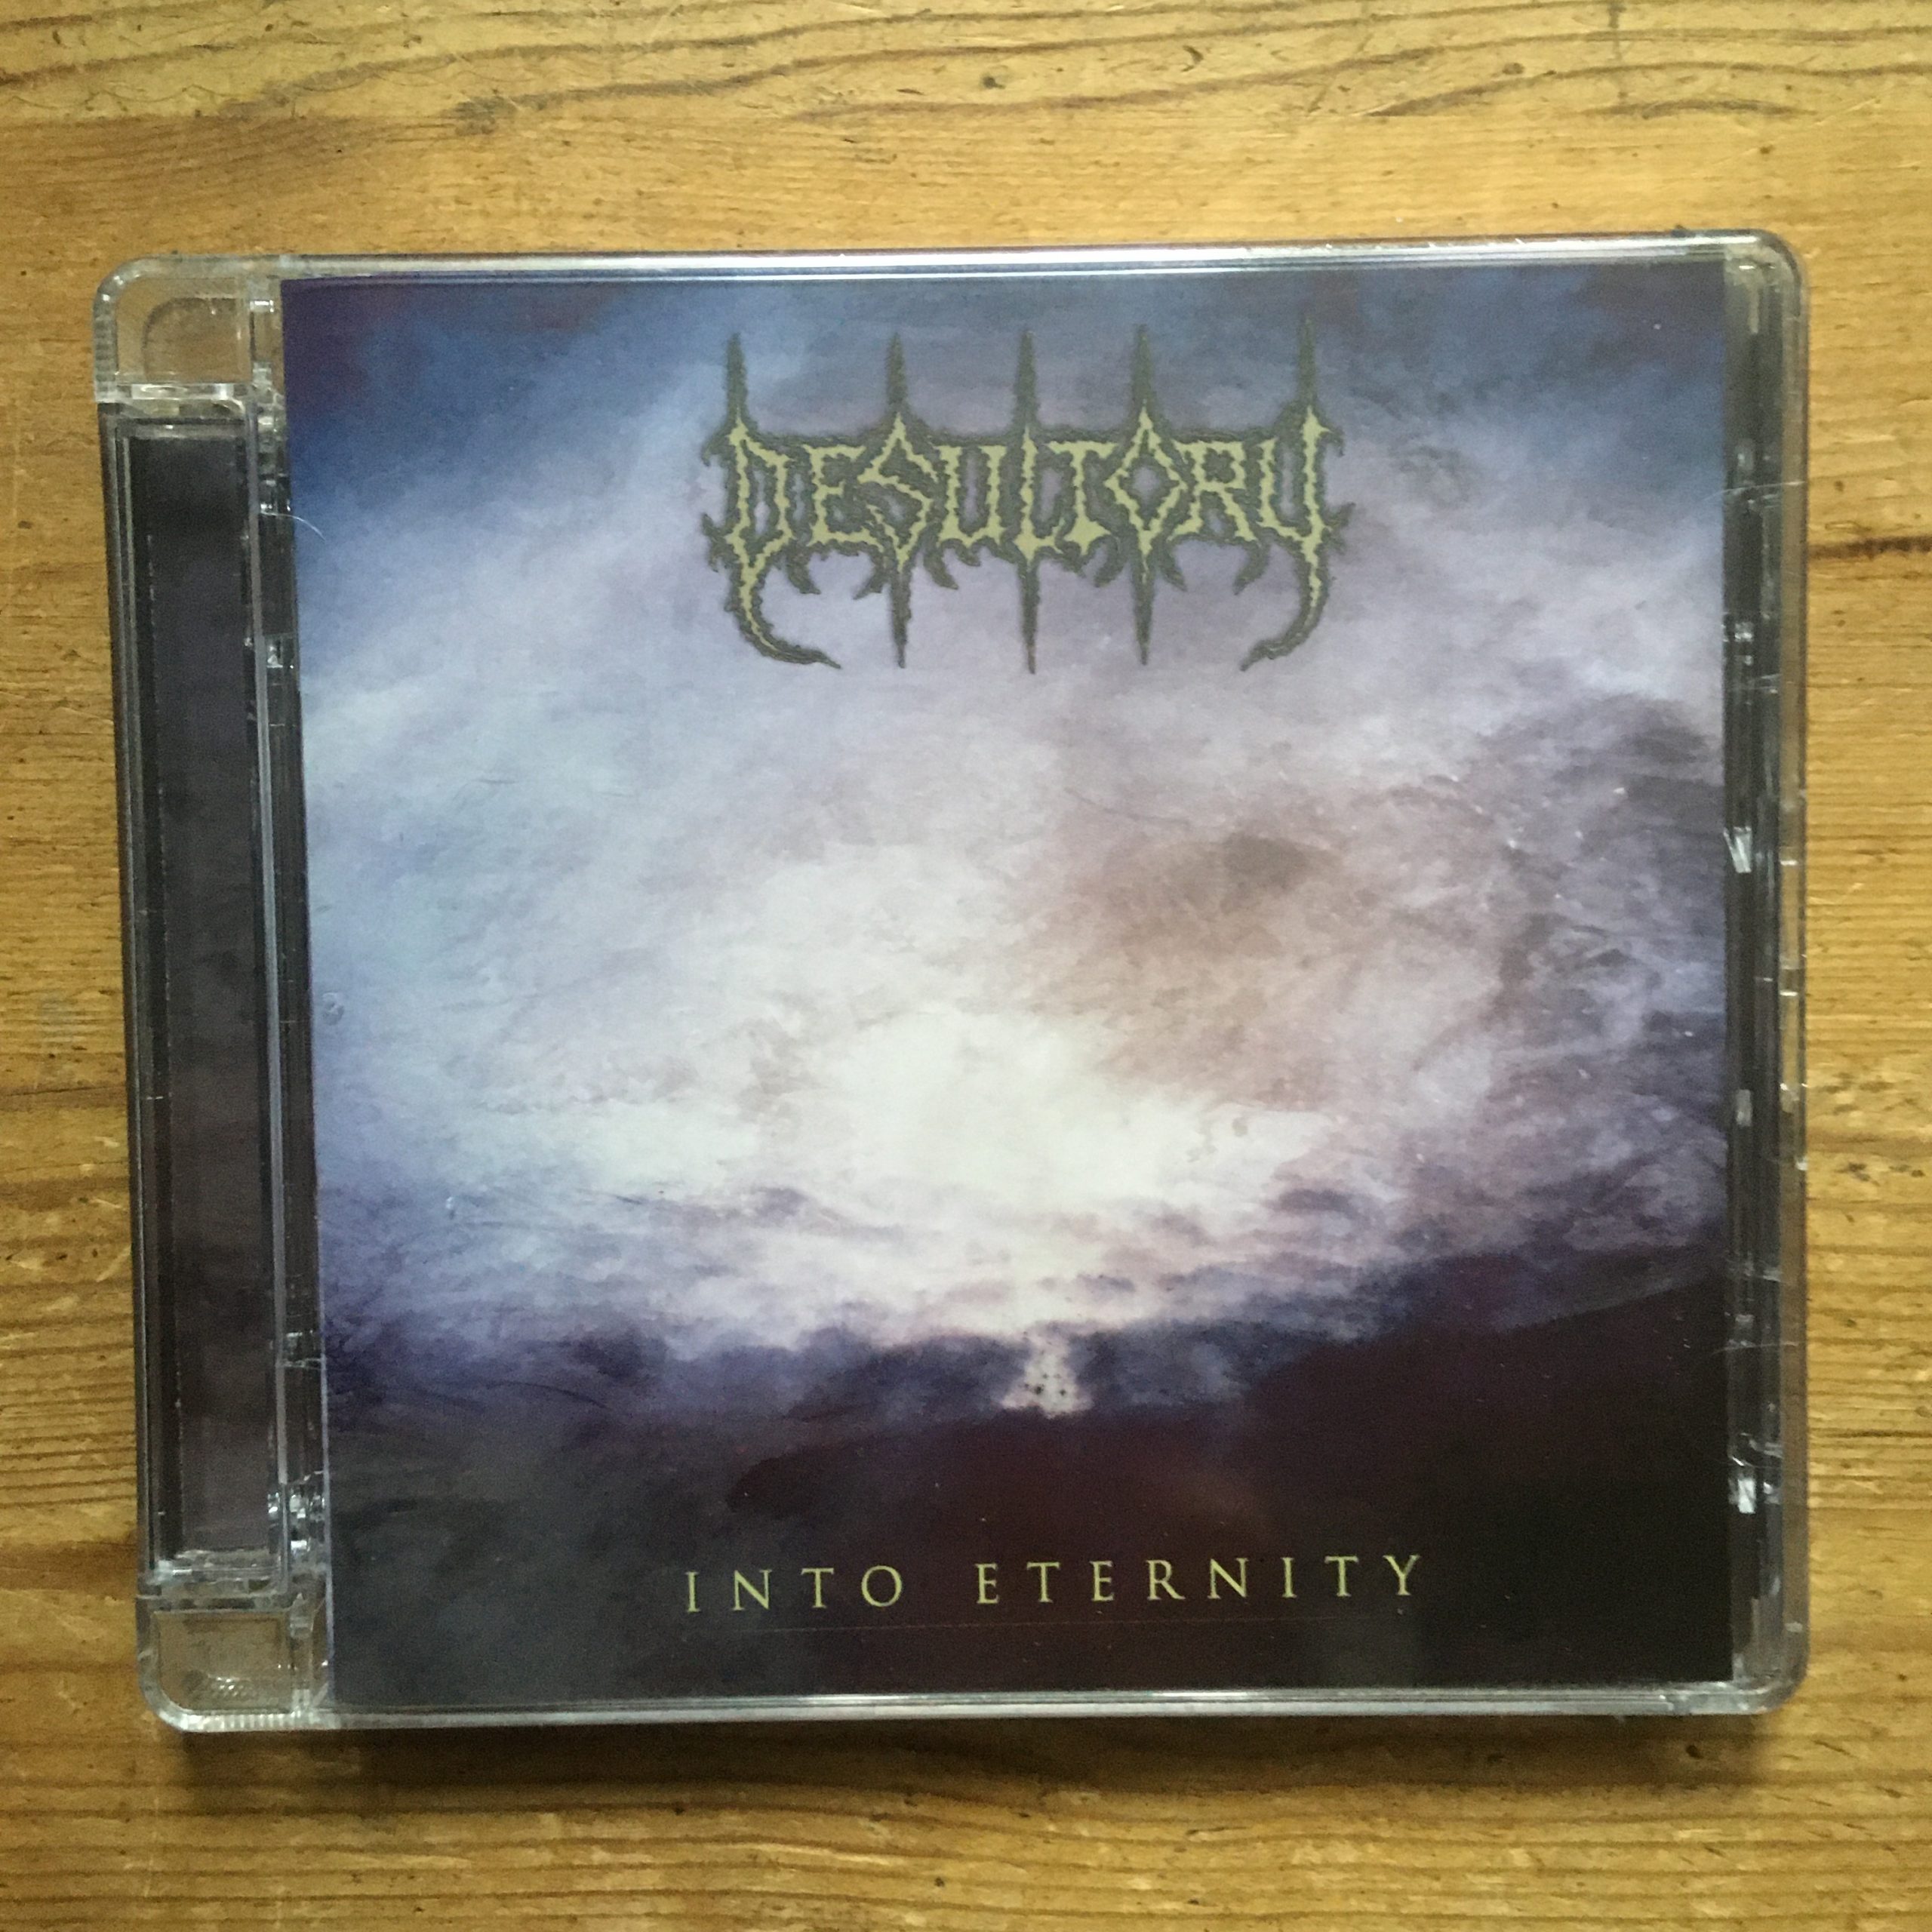 Photo of the Desultory - "Into Eternity" CD